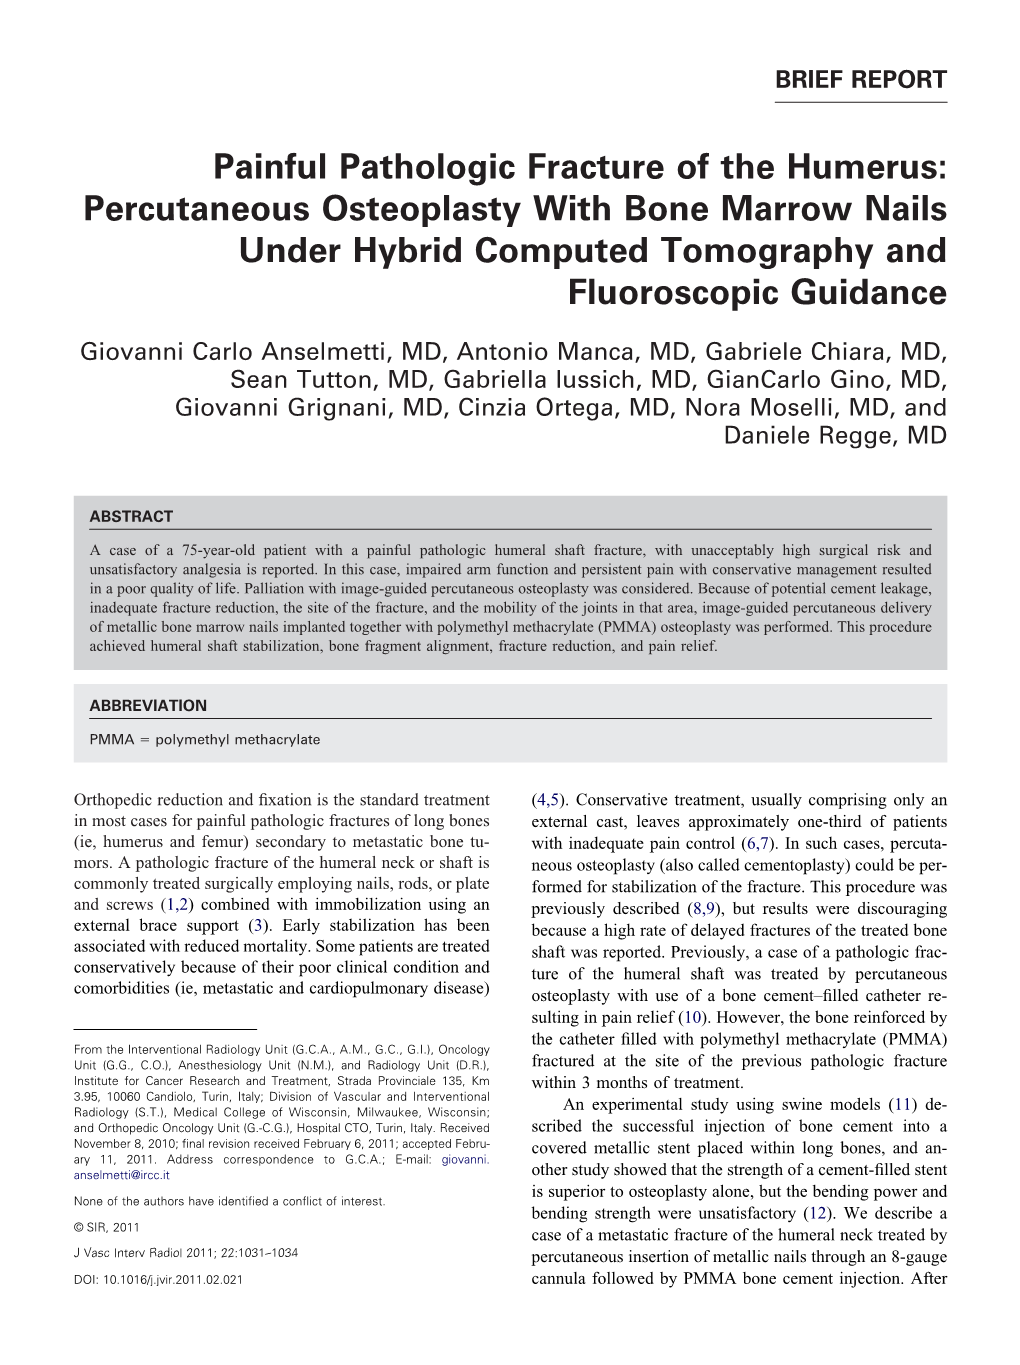 Painful Pathologic Fracture of the Humerus: Percutaneous Osteoplasty with Bone Marrow Nails Under Hybrid Computed Tomography and Fluoroscopic Guidance